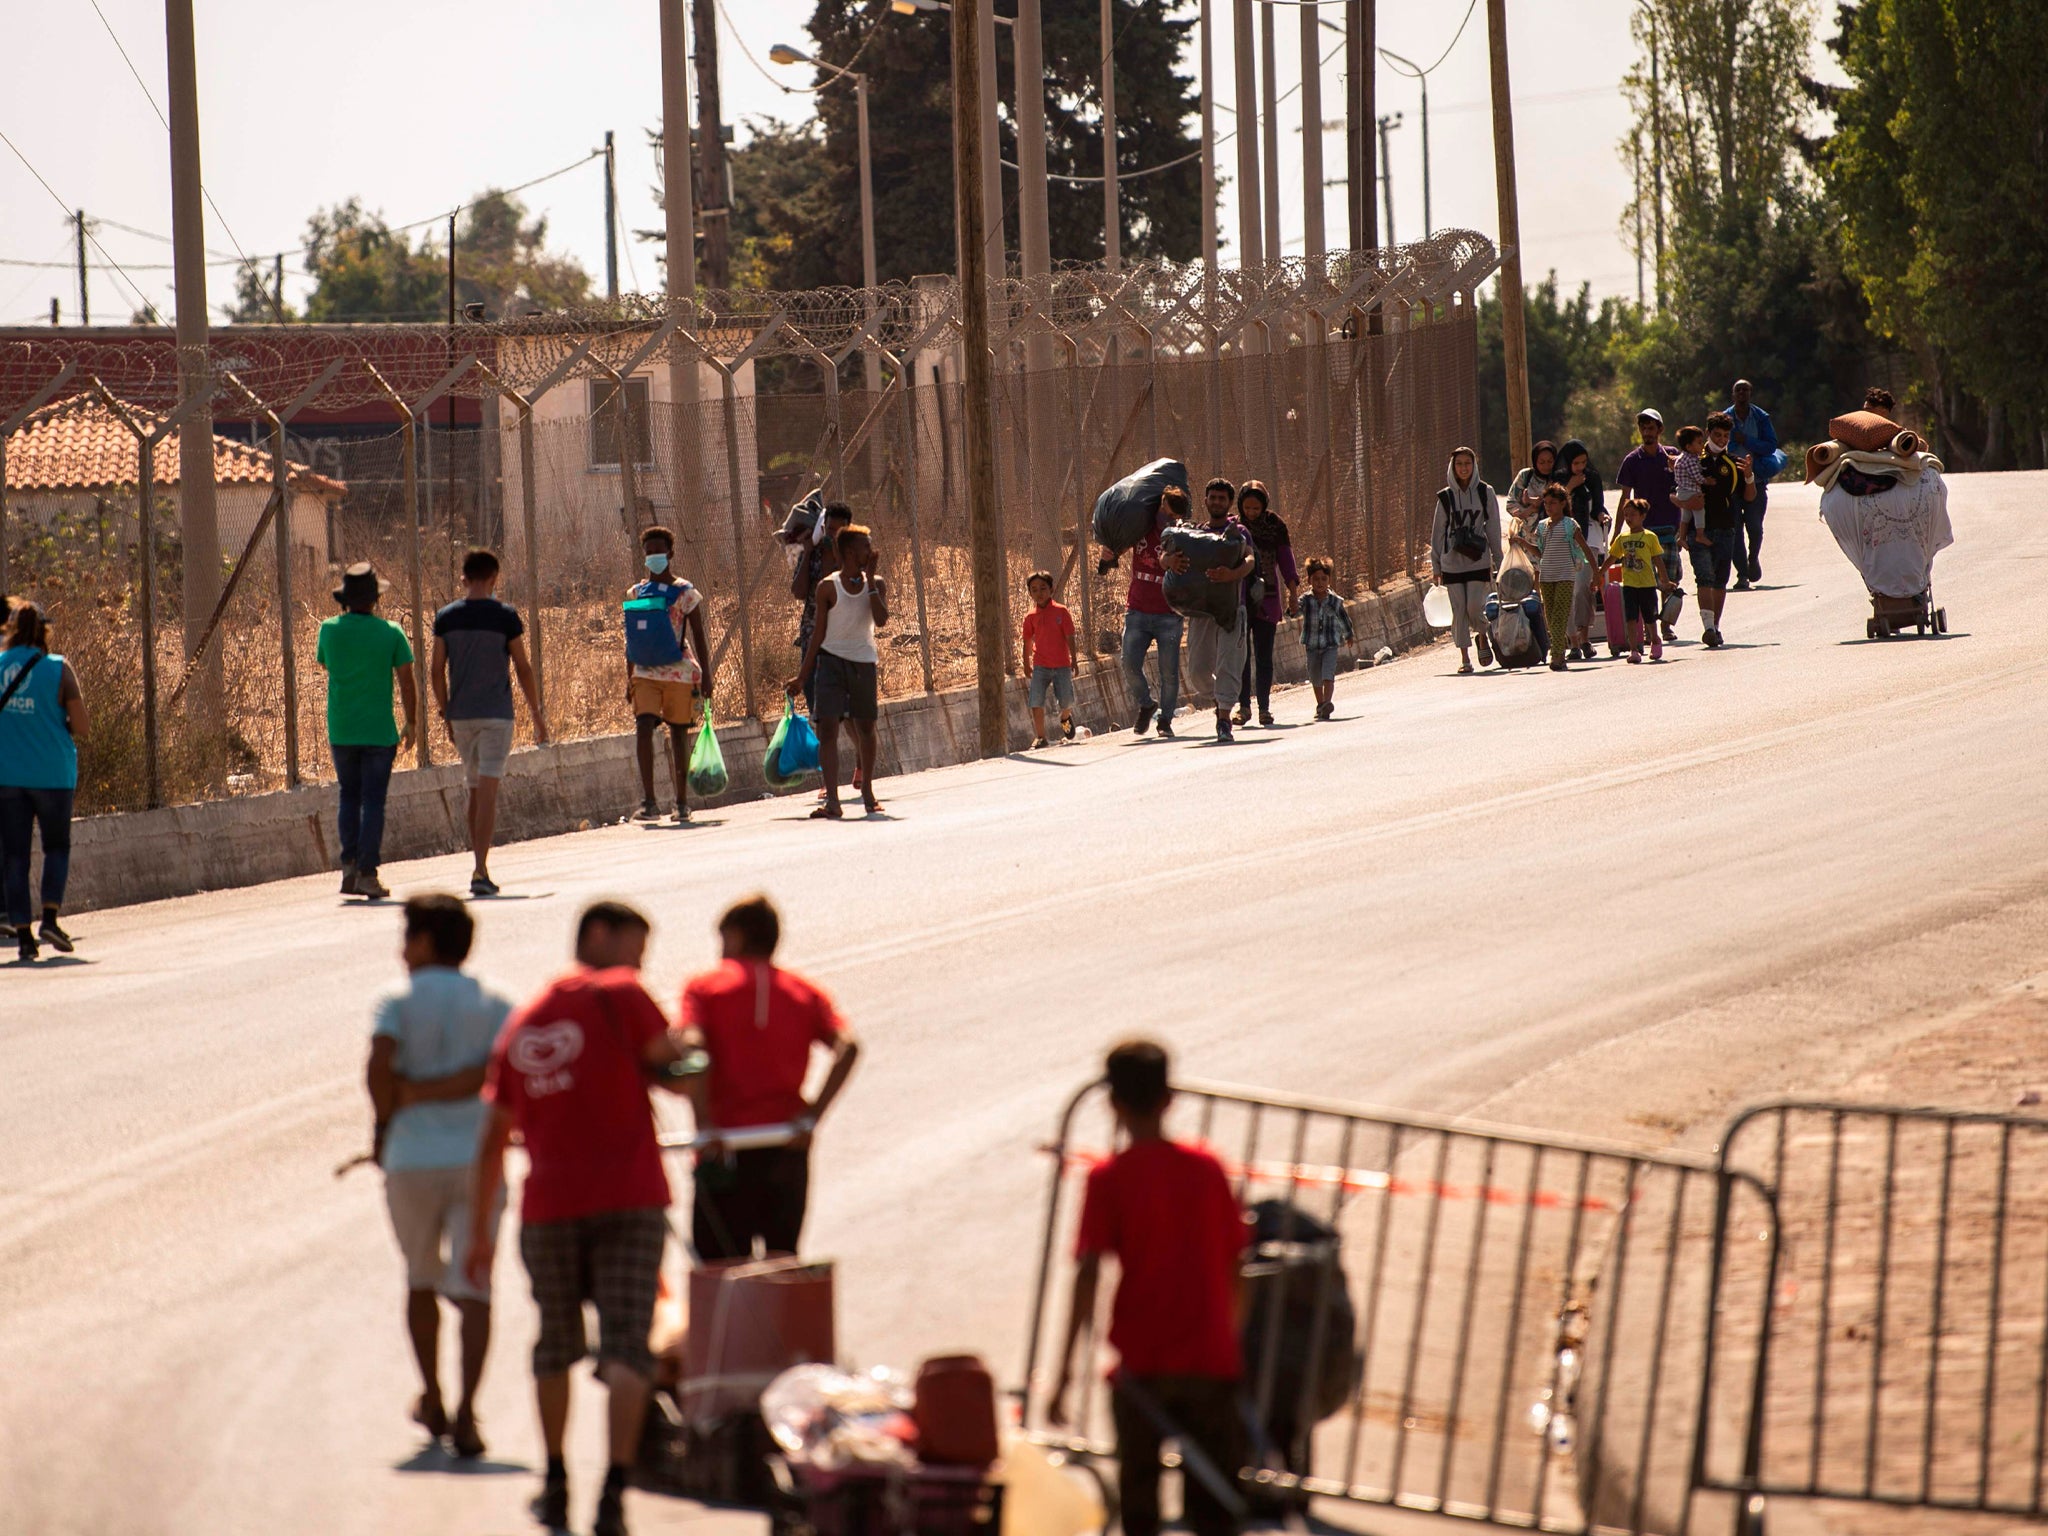 Migrants enter a new temporary camp near Panagiouda, hosting refugees and migrants from the Moria camp destroyed by a fire on the night of September 8th